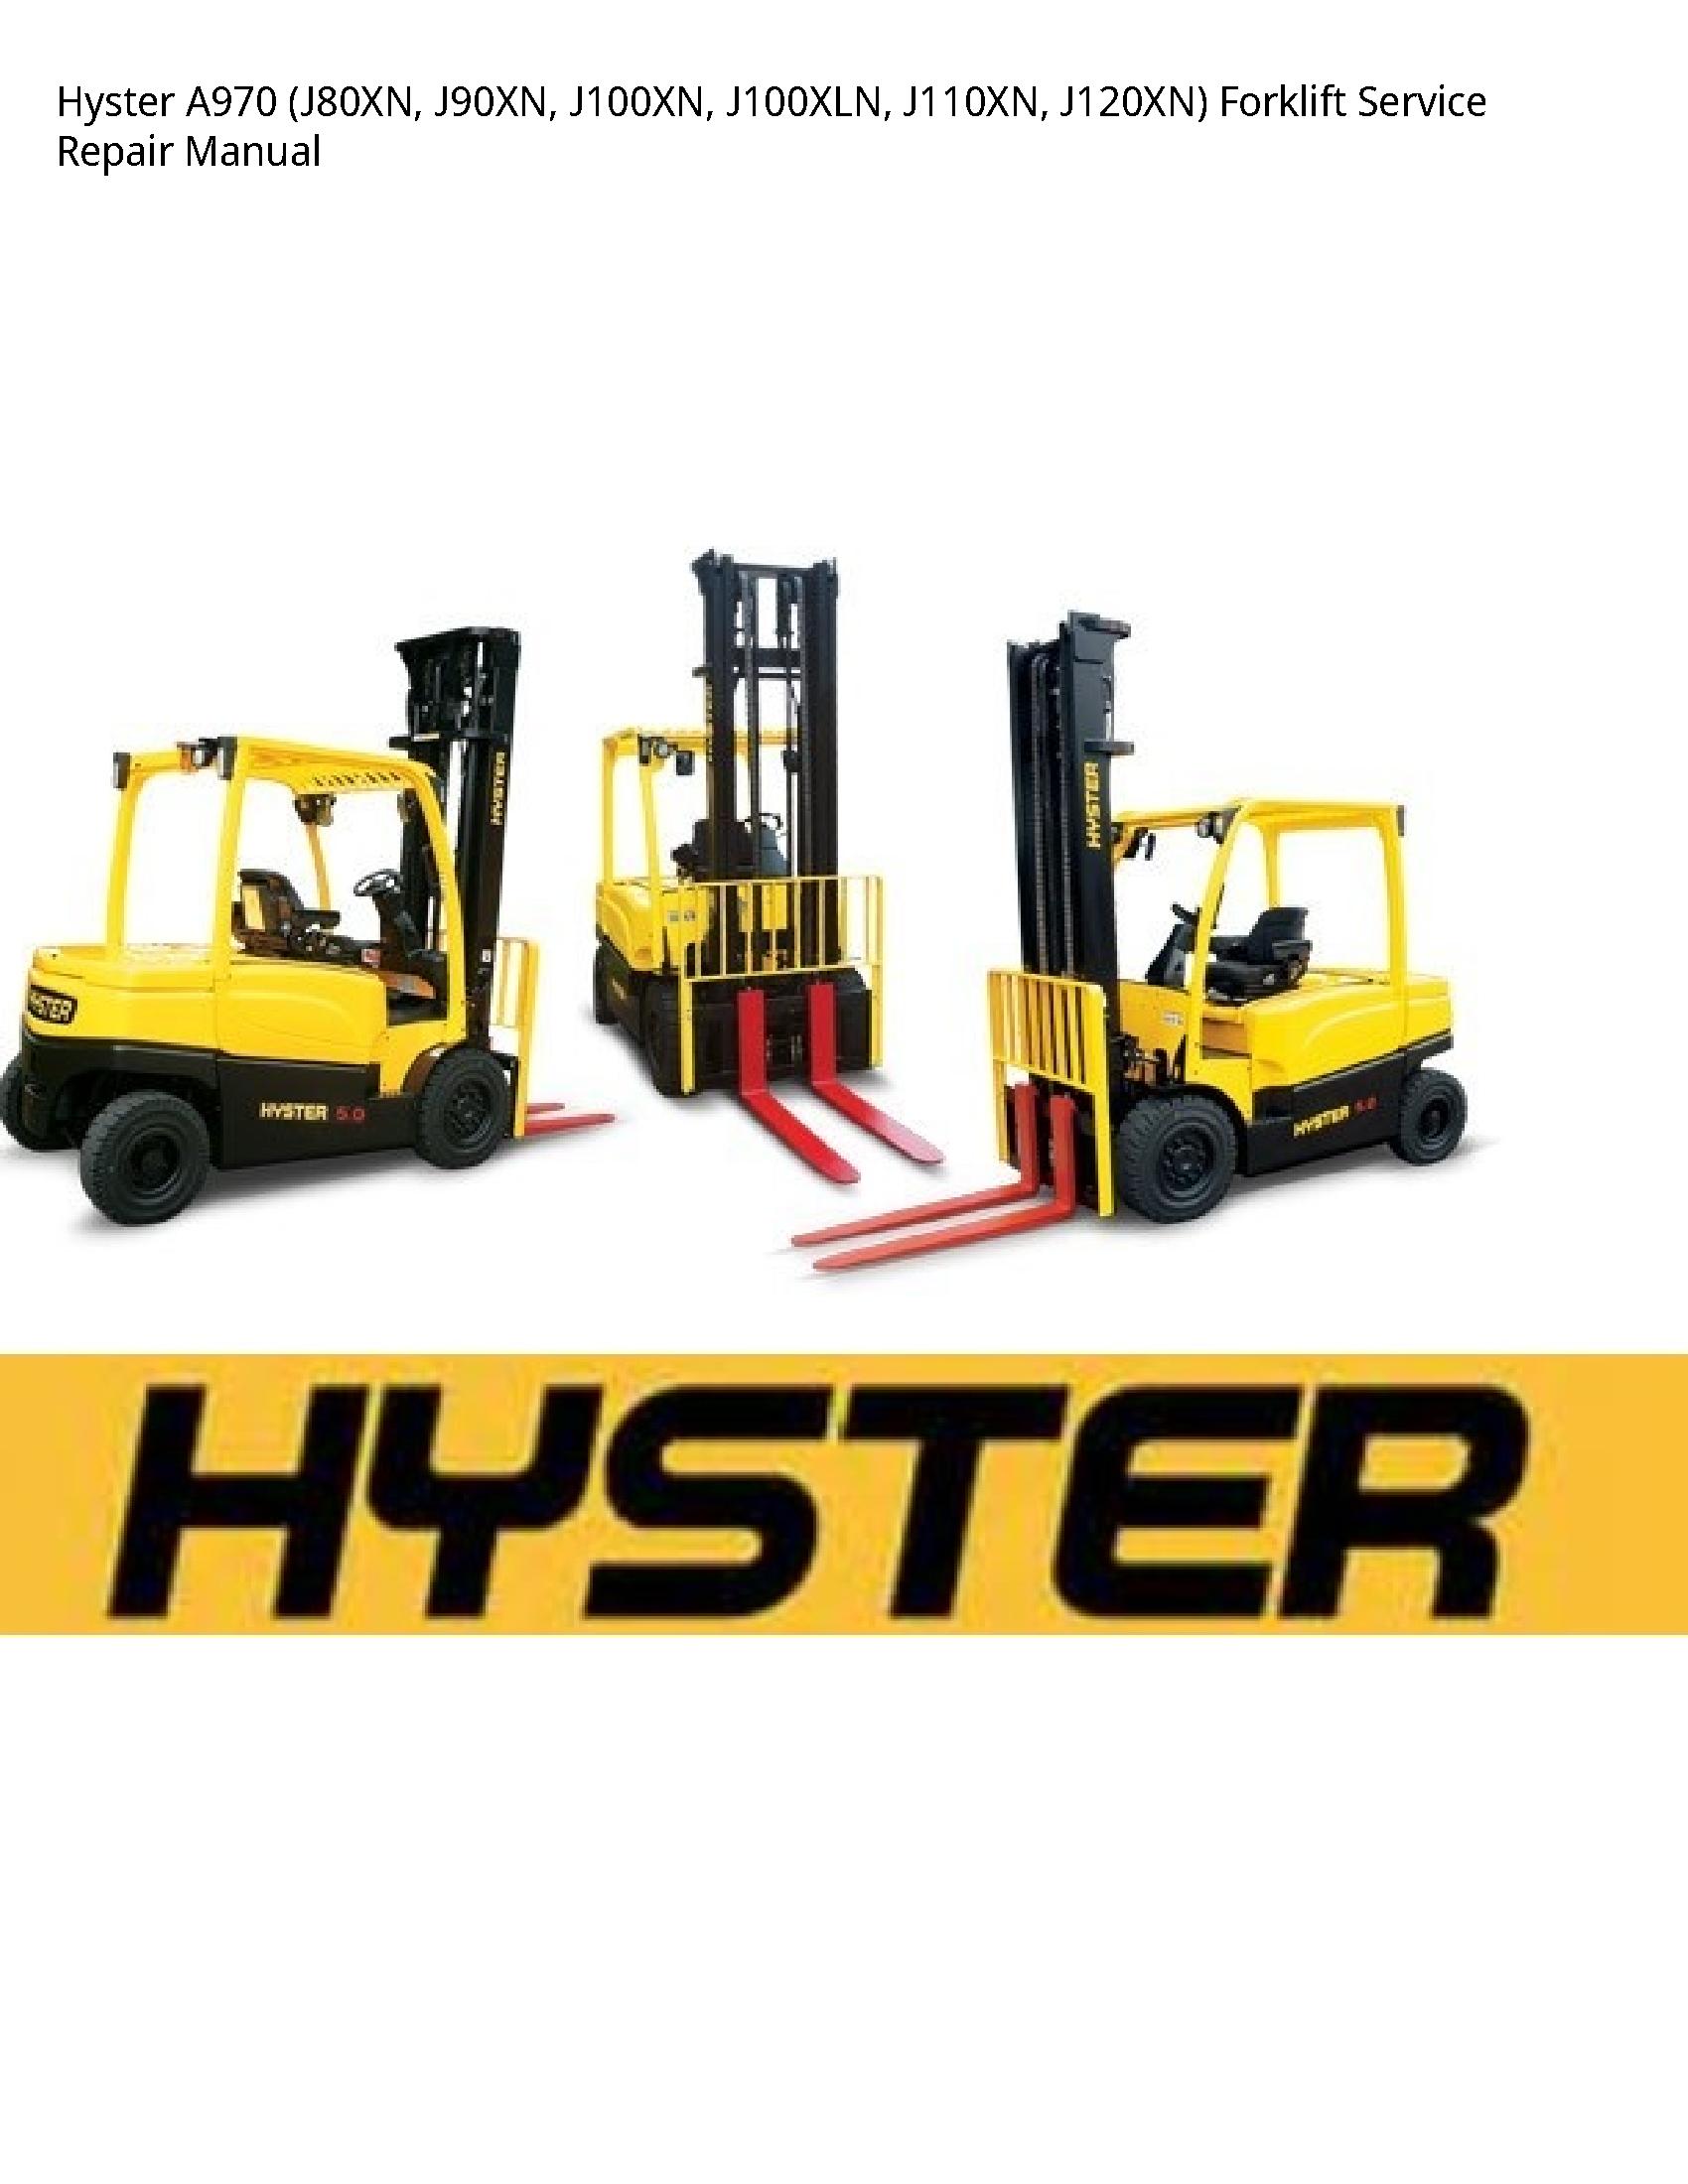 Hyster A970 Forklift manual